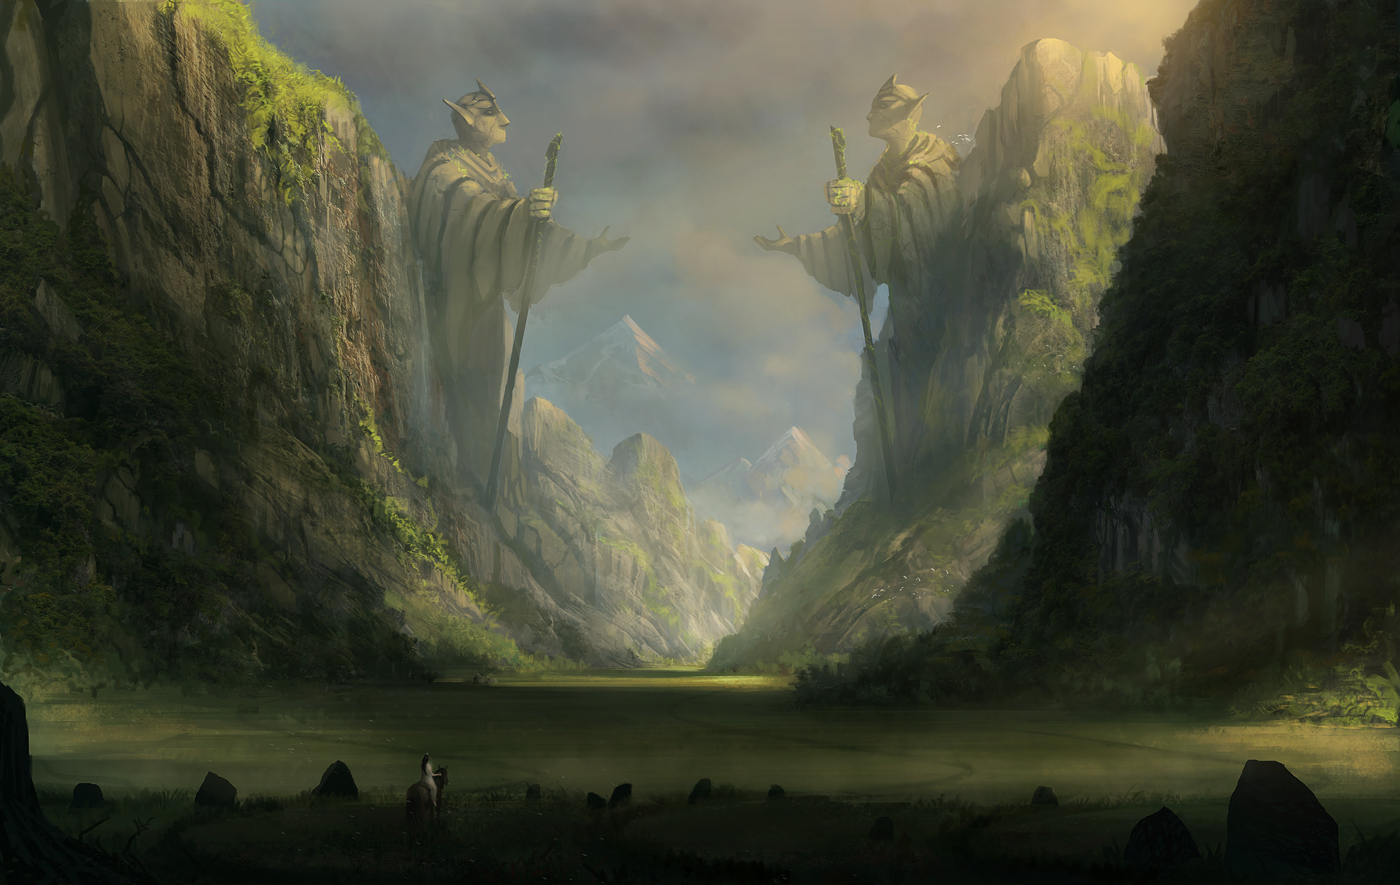 Through the Ancient Valley by Jorge Jacinto